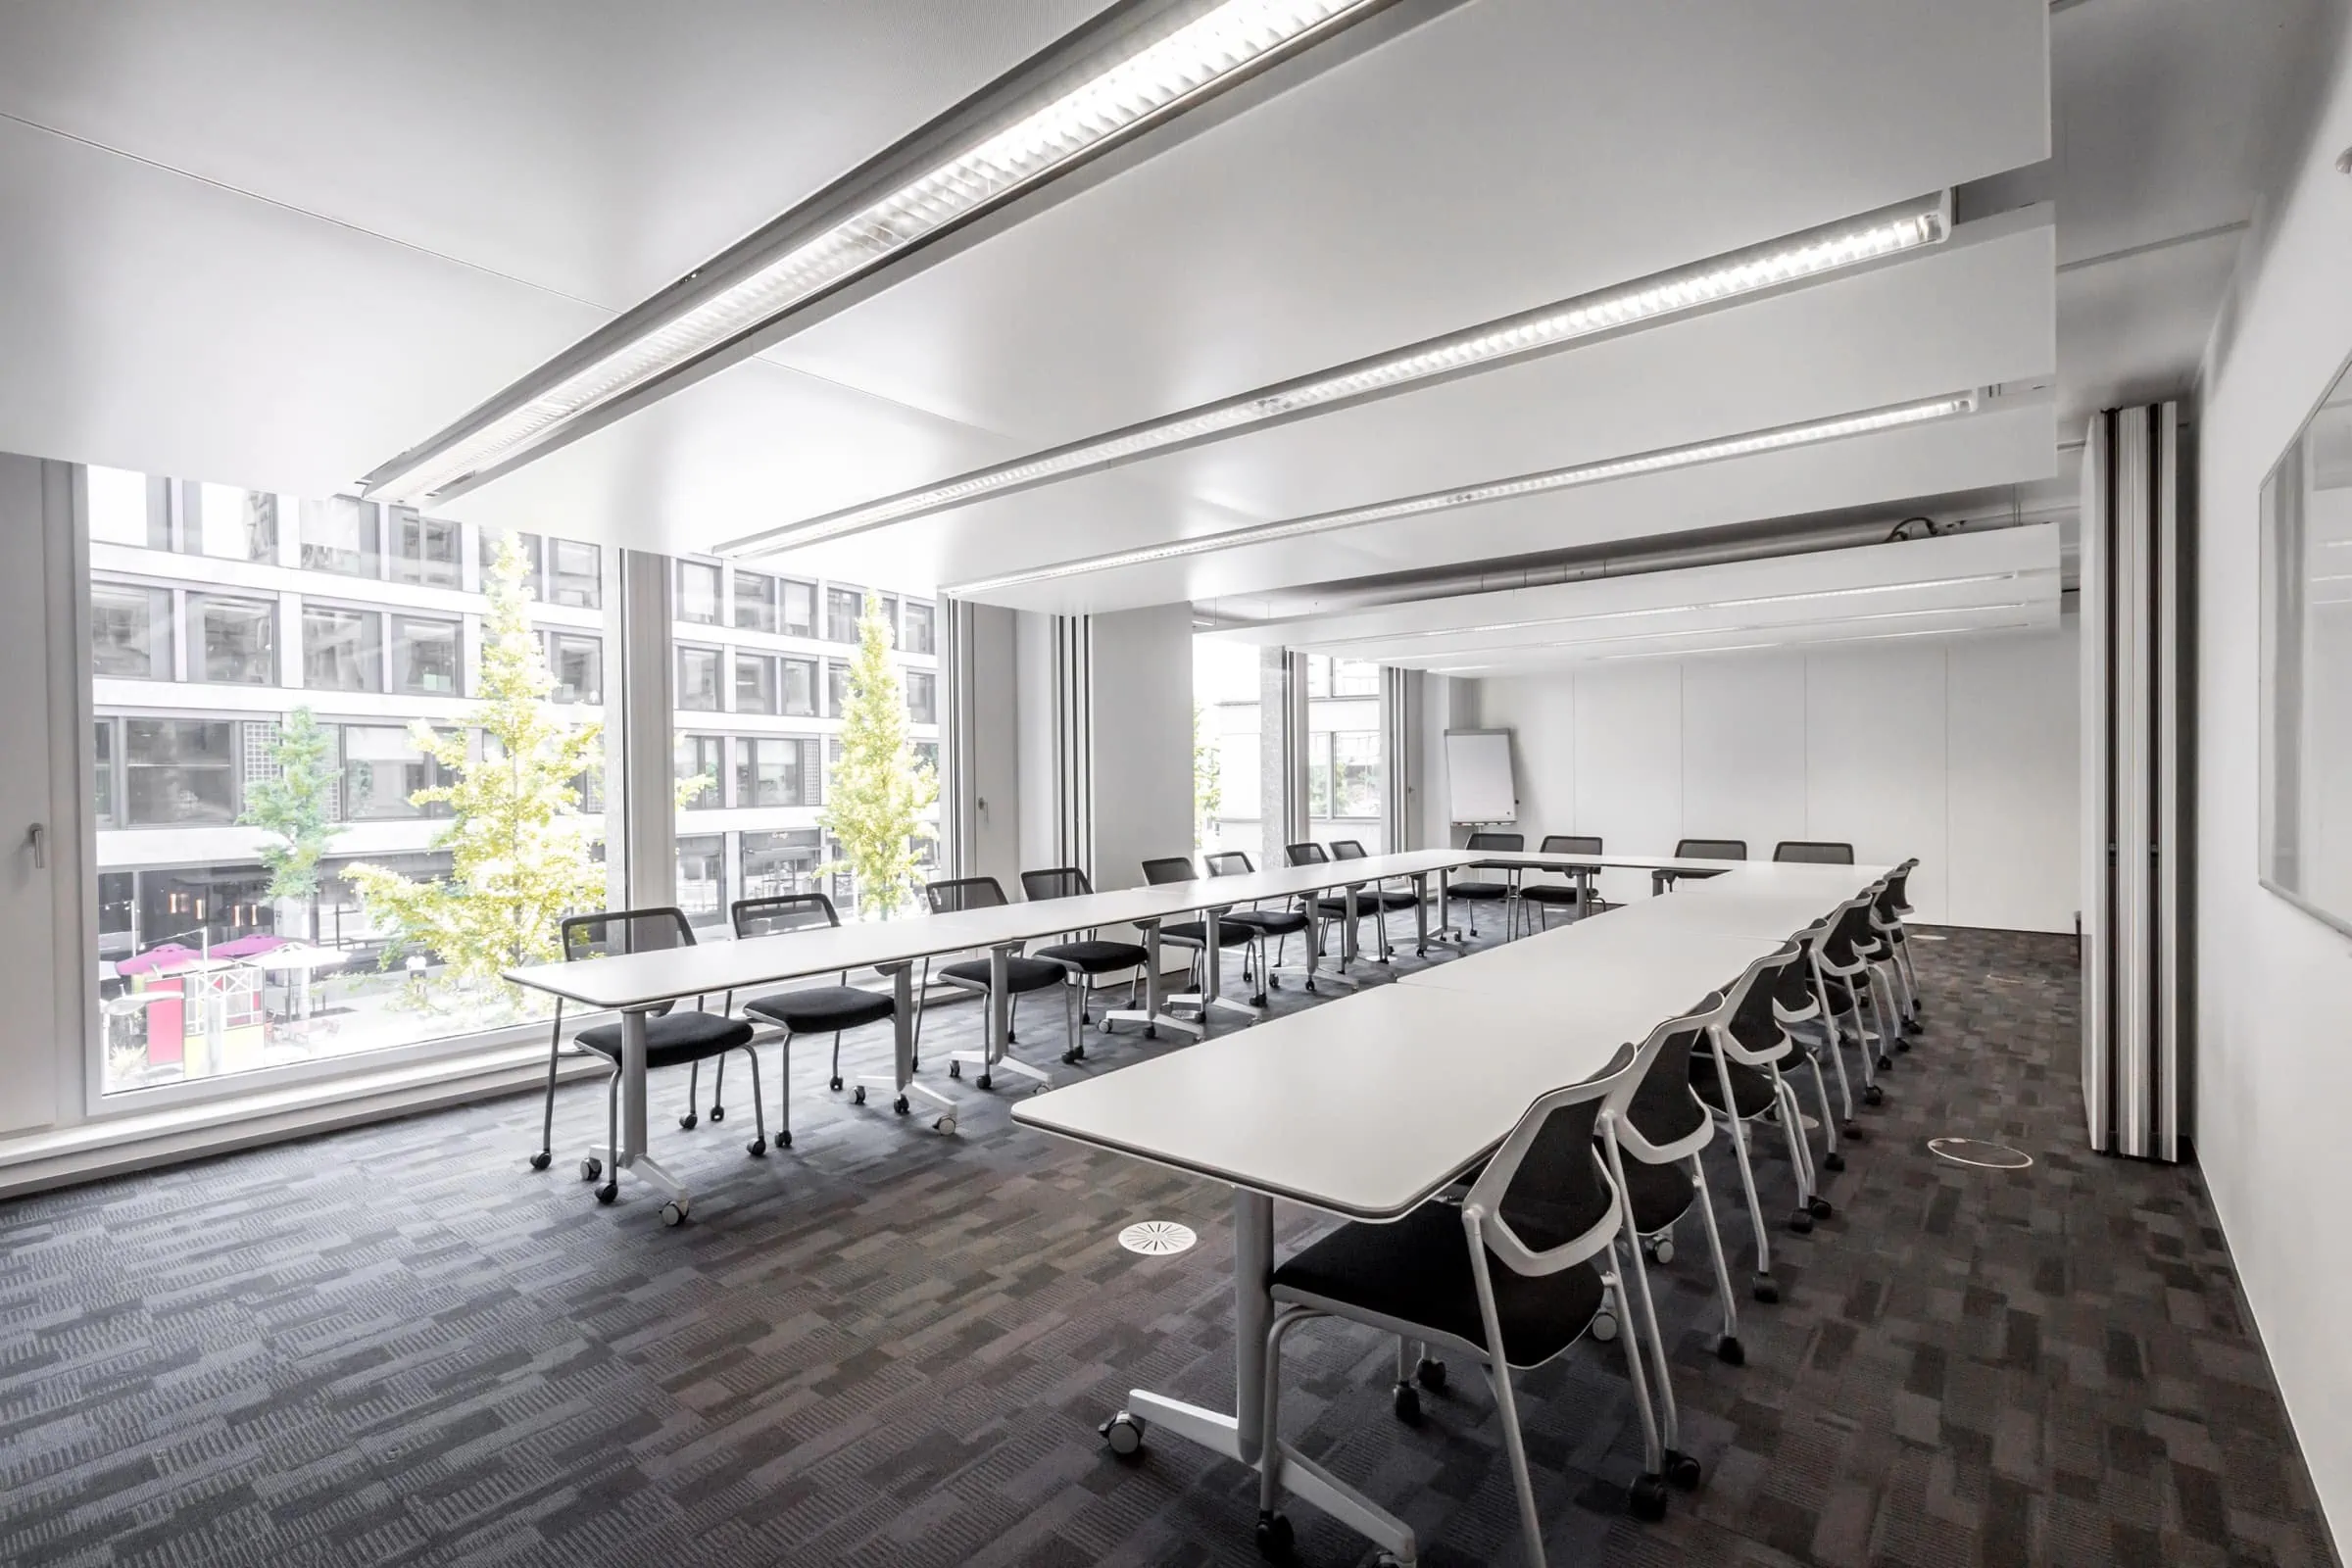 Seminar room with U-shaped seating at OBC Suisse Europaallee